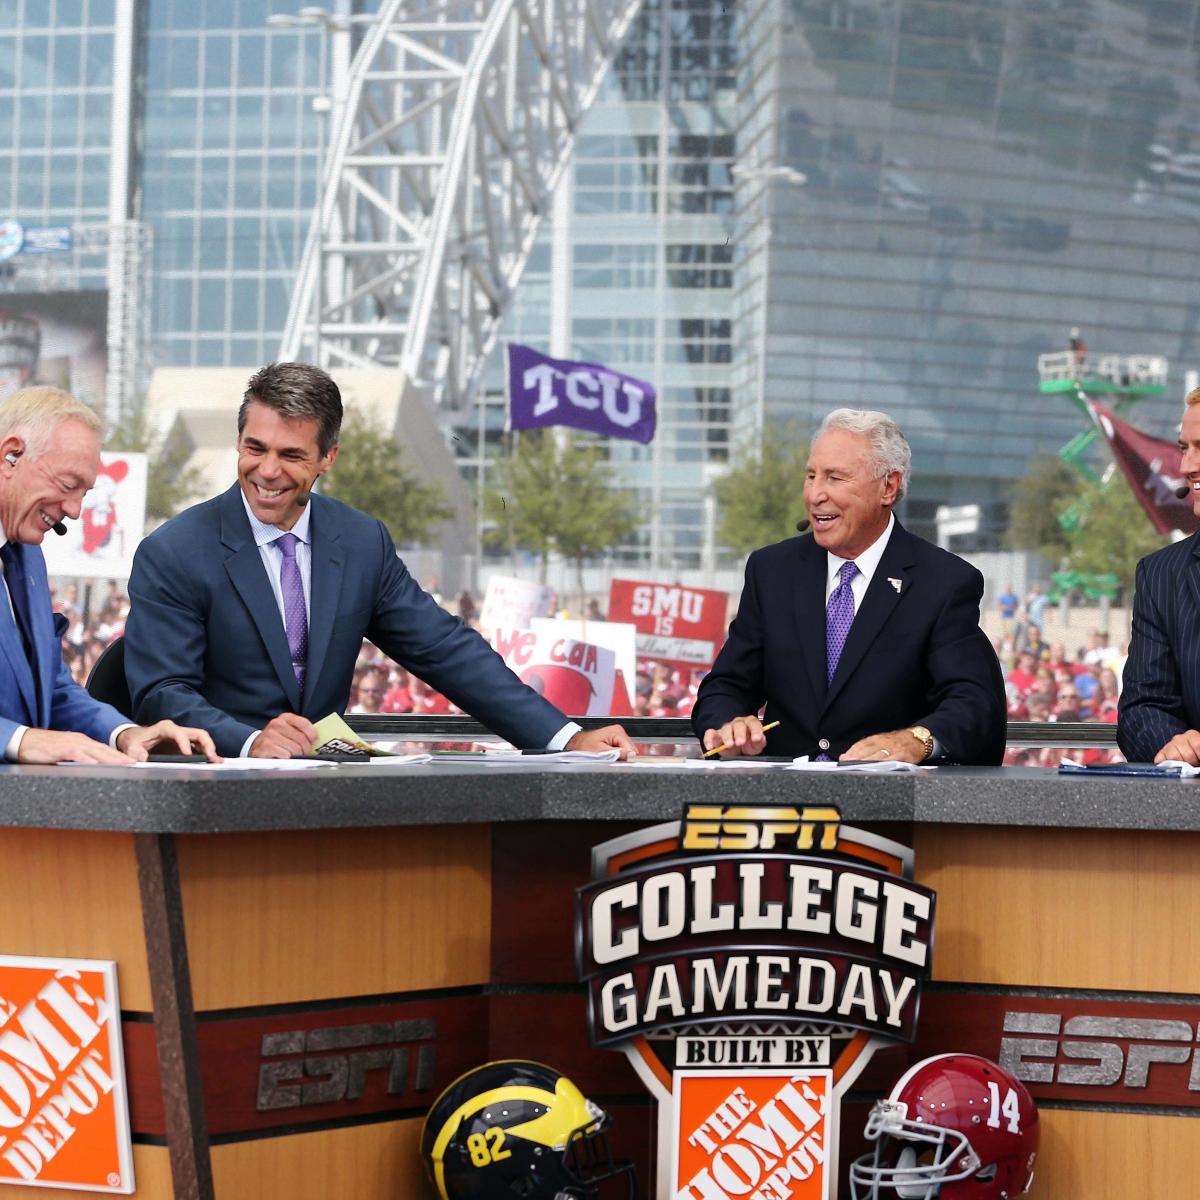 College Gameday 2012 Schedule: Previewing the Show's Top Destinations for Week 3 | Bleacher